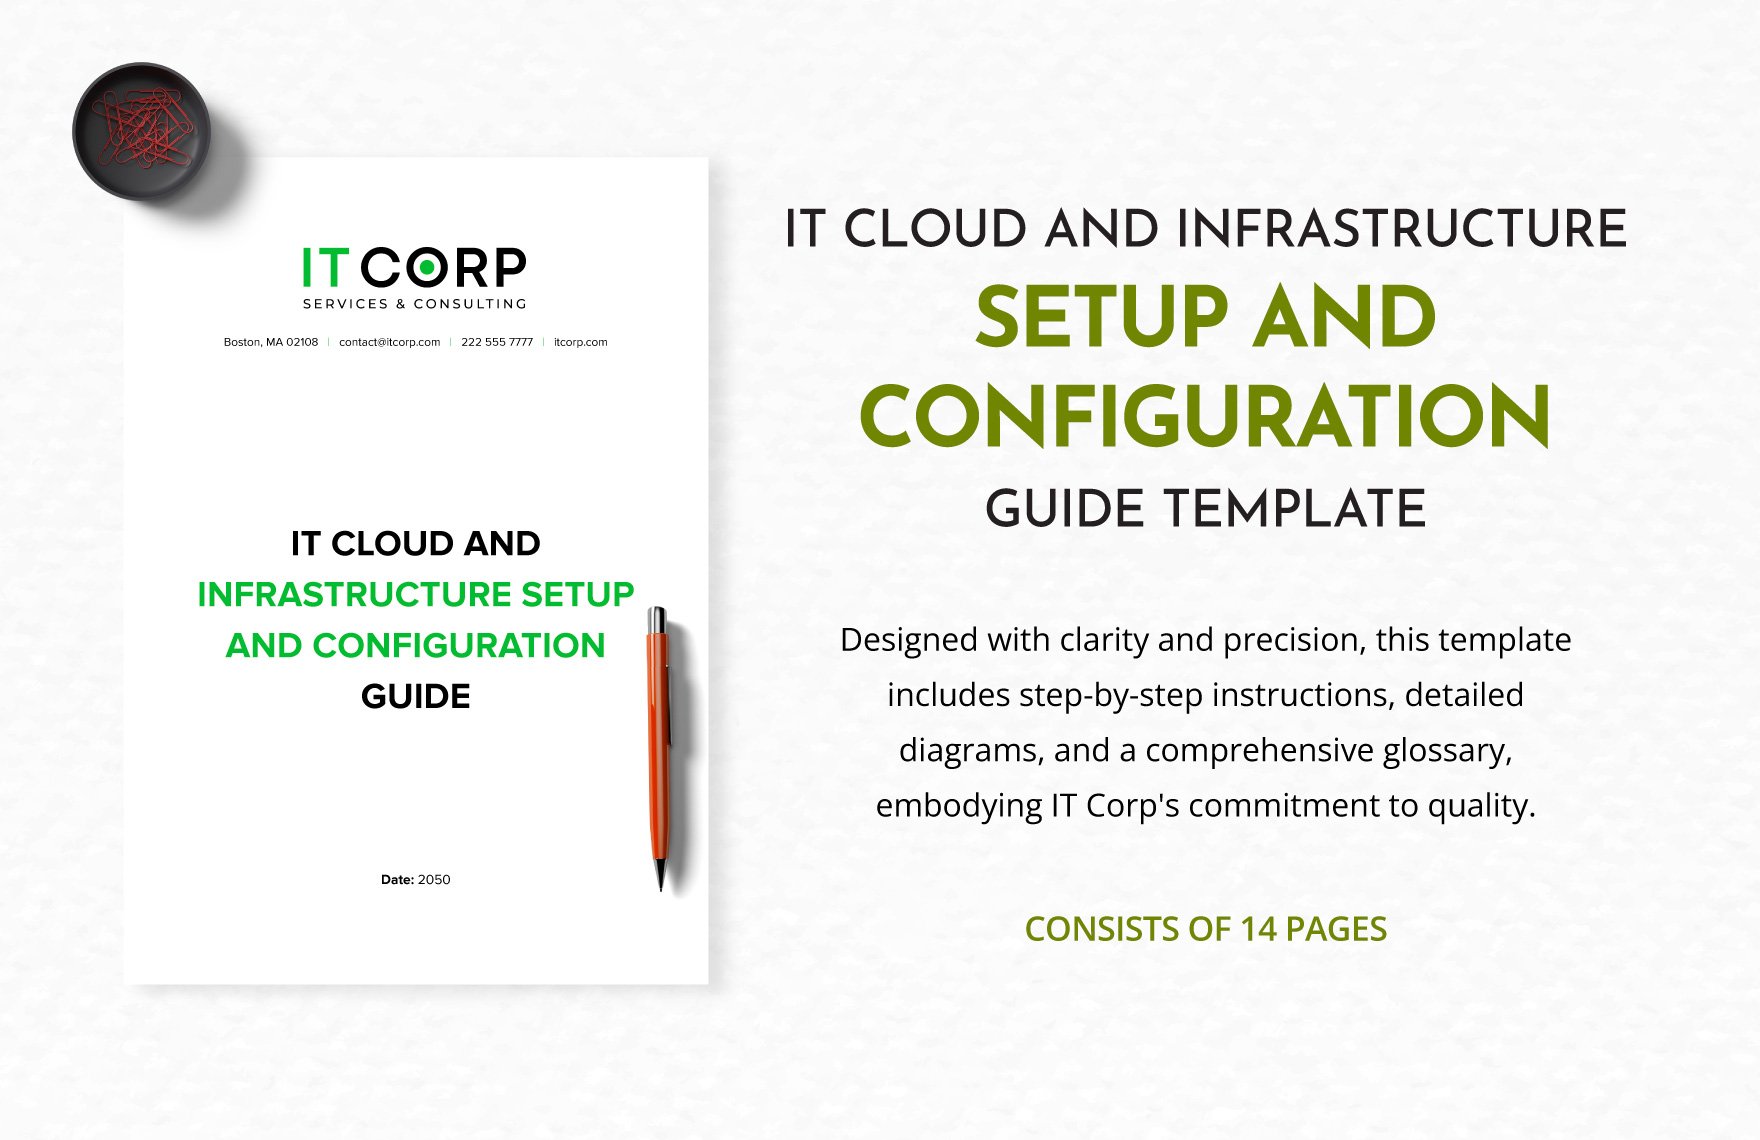 IT Cloud and Infrastructure Setup and Configuration Guide Template